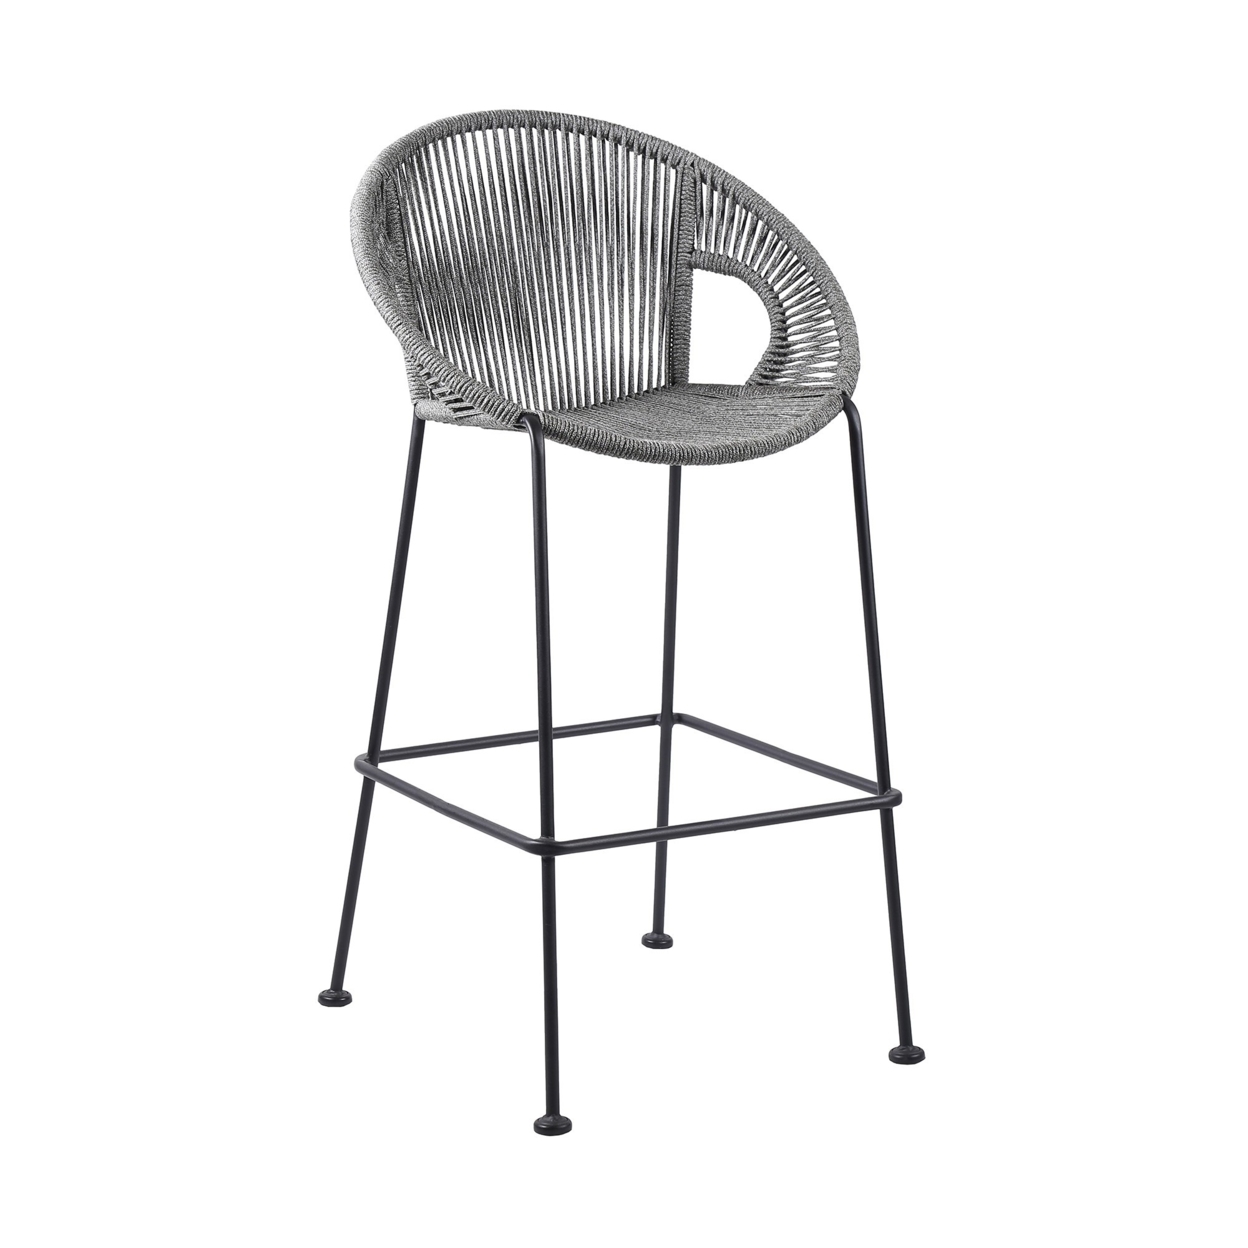 30 Inch Indoor Outdoor Bar Stool With Rounded Rope Woven Seat, Gray- Saltoro Sherpi